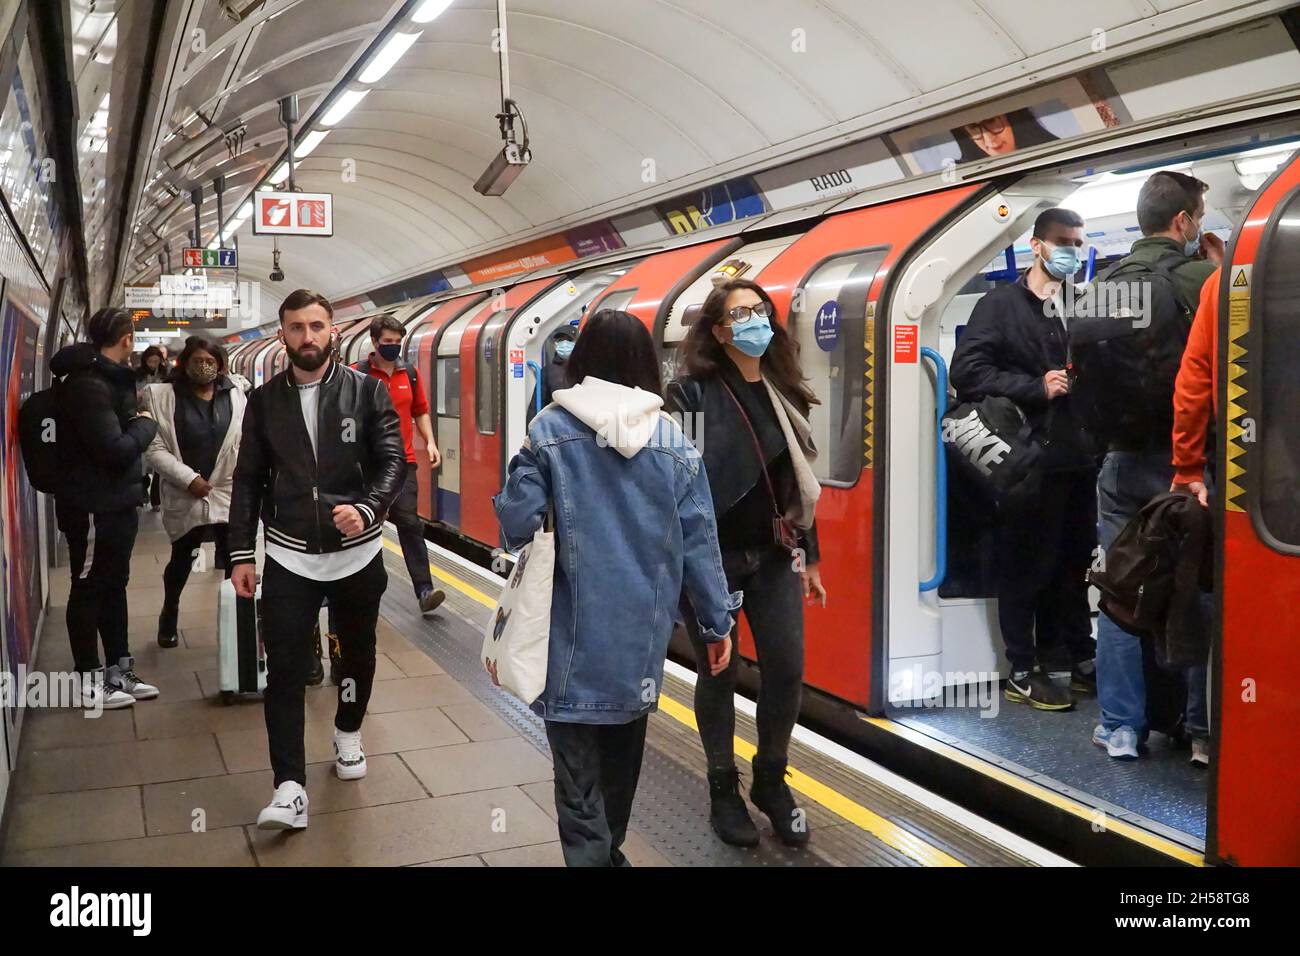 London, UK, 7 November 2021: Many but not all passengers on the London Underground wear face masks to reduce the spread of coronavirus amid high levels of new Covid-19 cases in the country. Transport for London regulations make it compulsory to wear a face covering unless medically exempt but the rule is widely ignored. Anna Watson/Alamy Live News Stock Photo